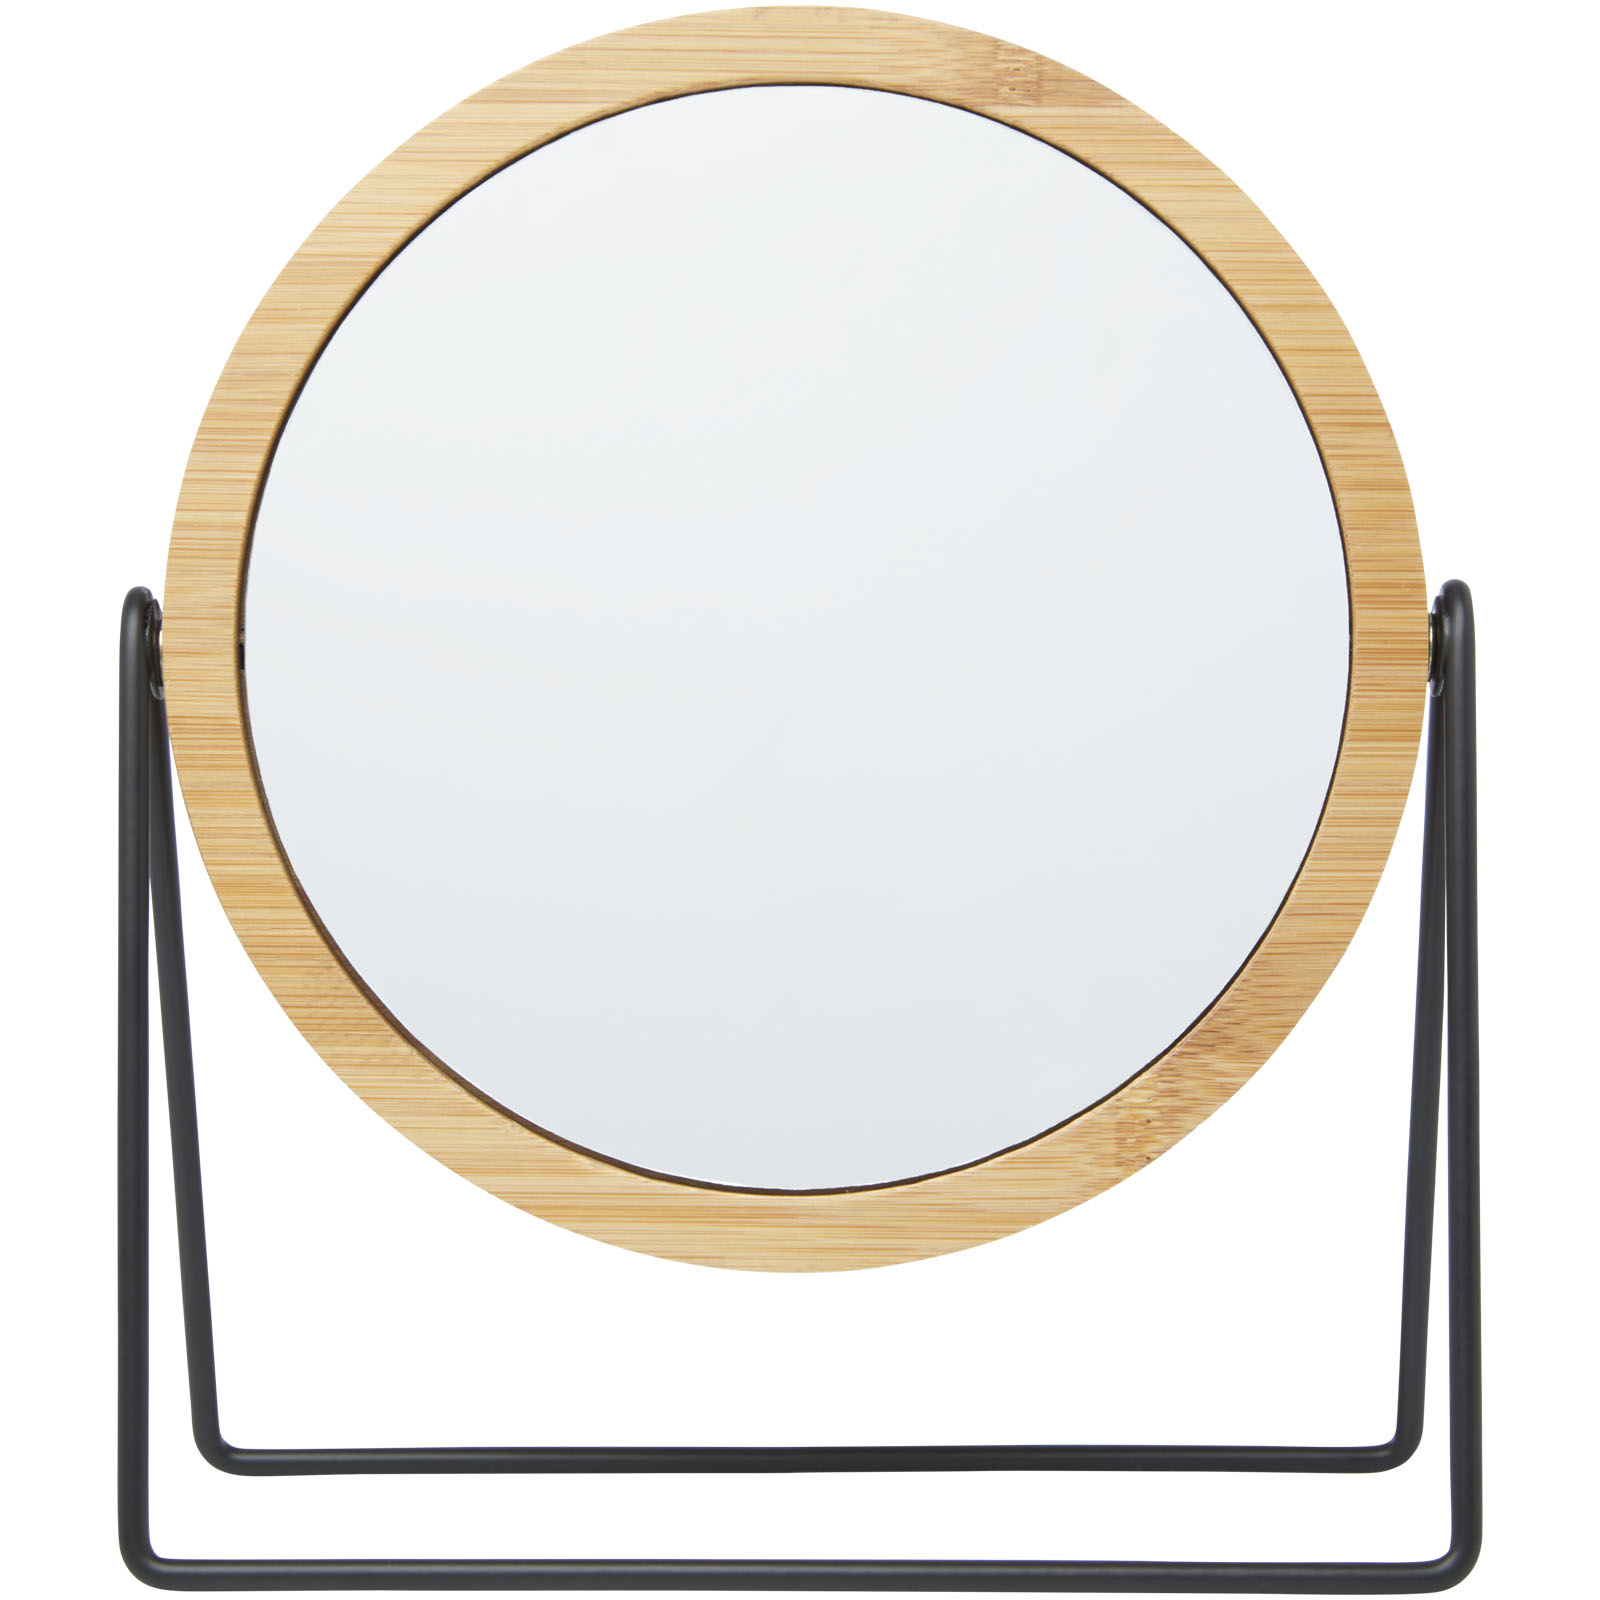 Advertising Personal Care - Hyrra bamboo standing mirror - 1